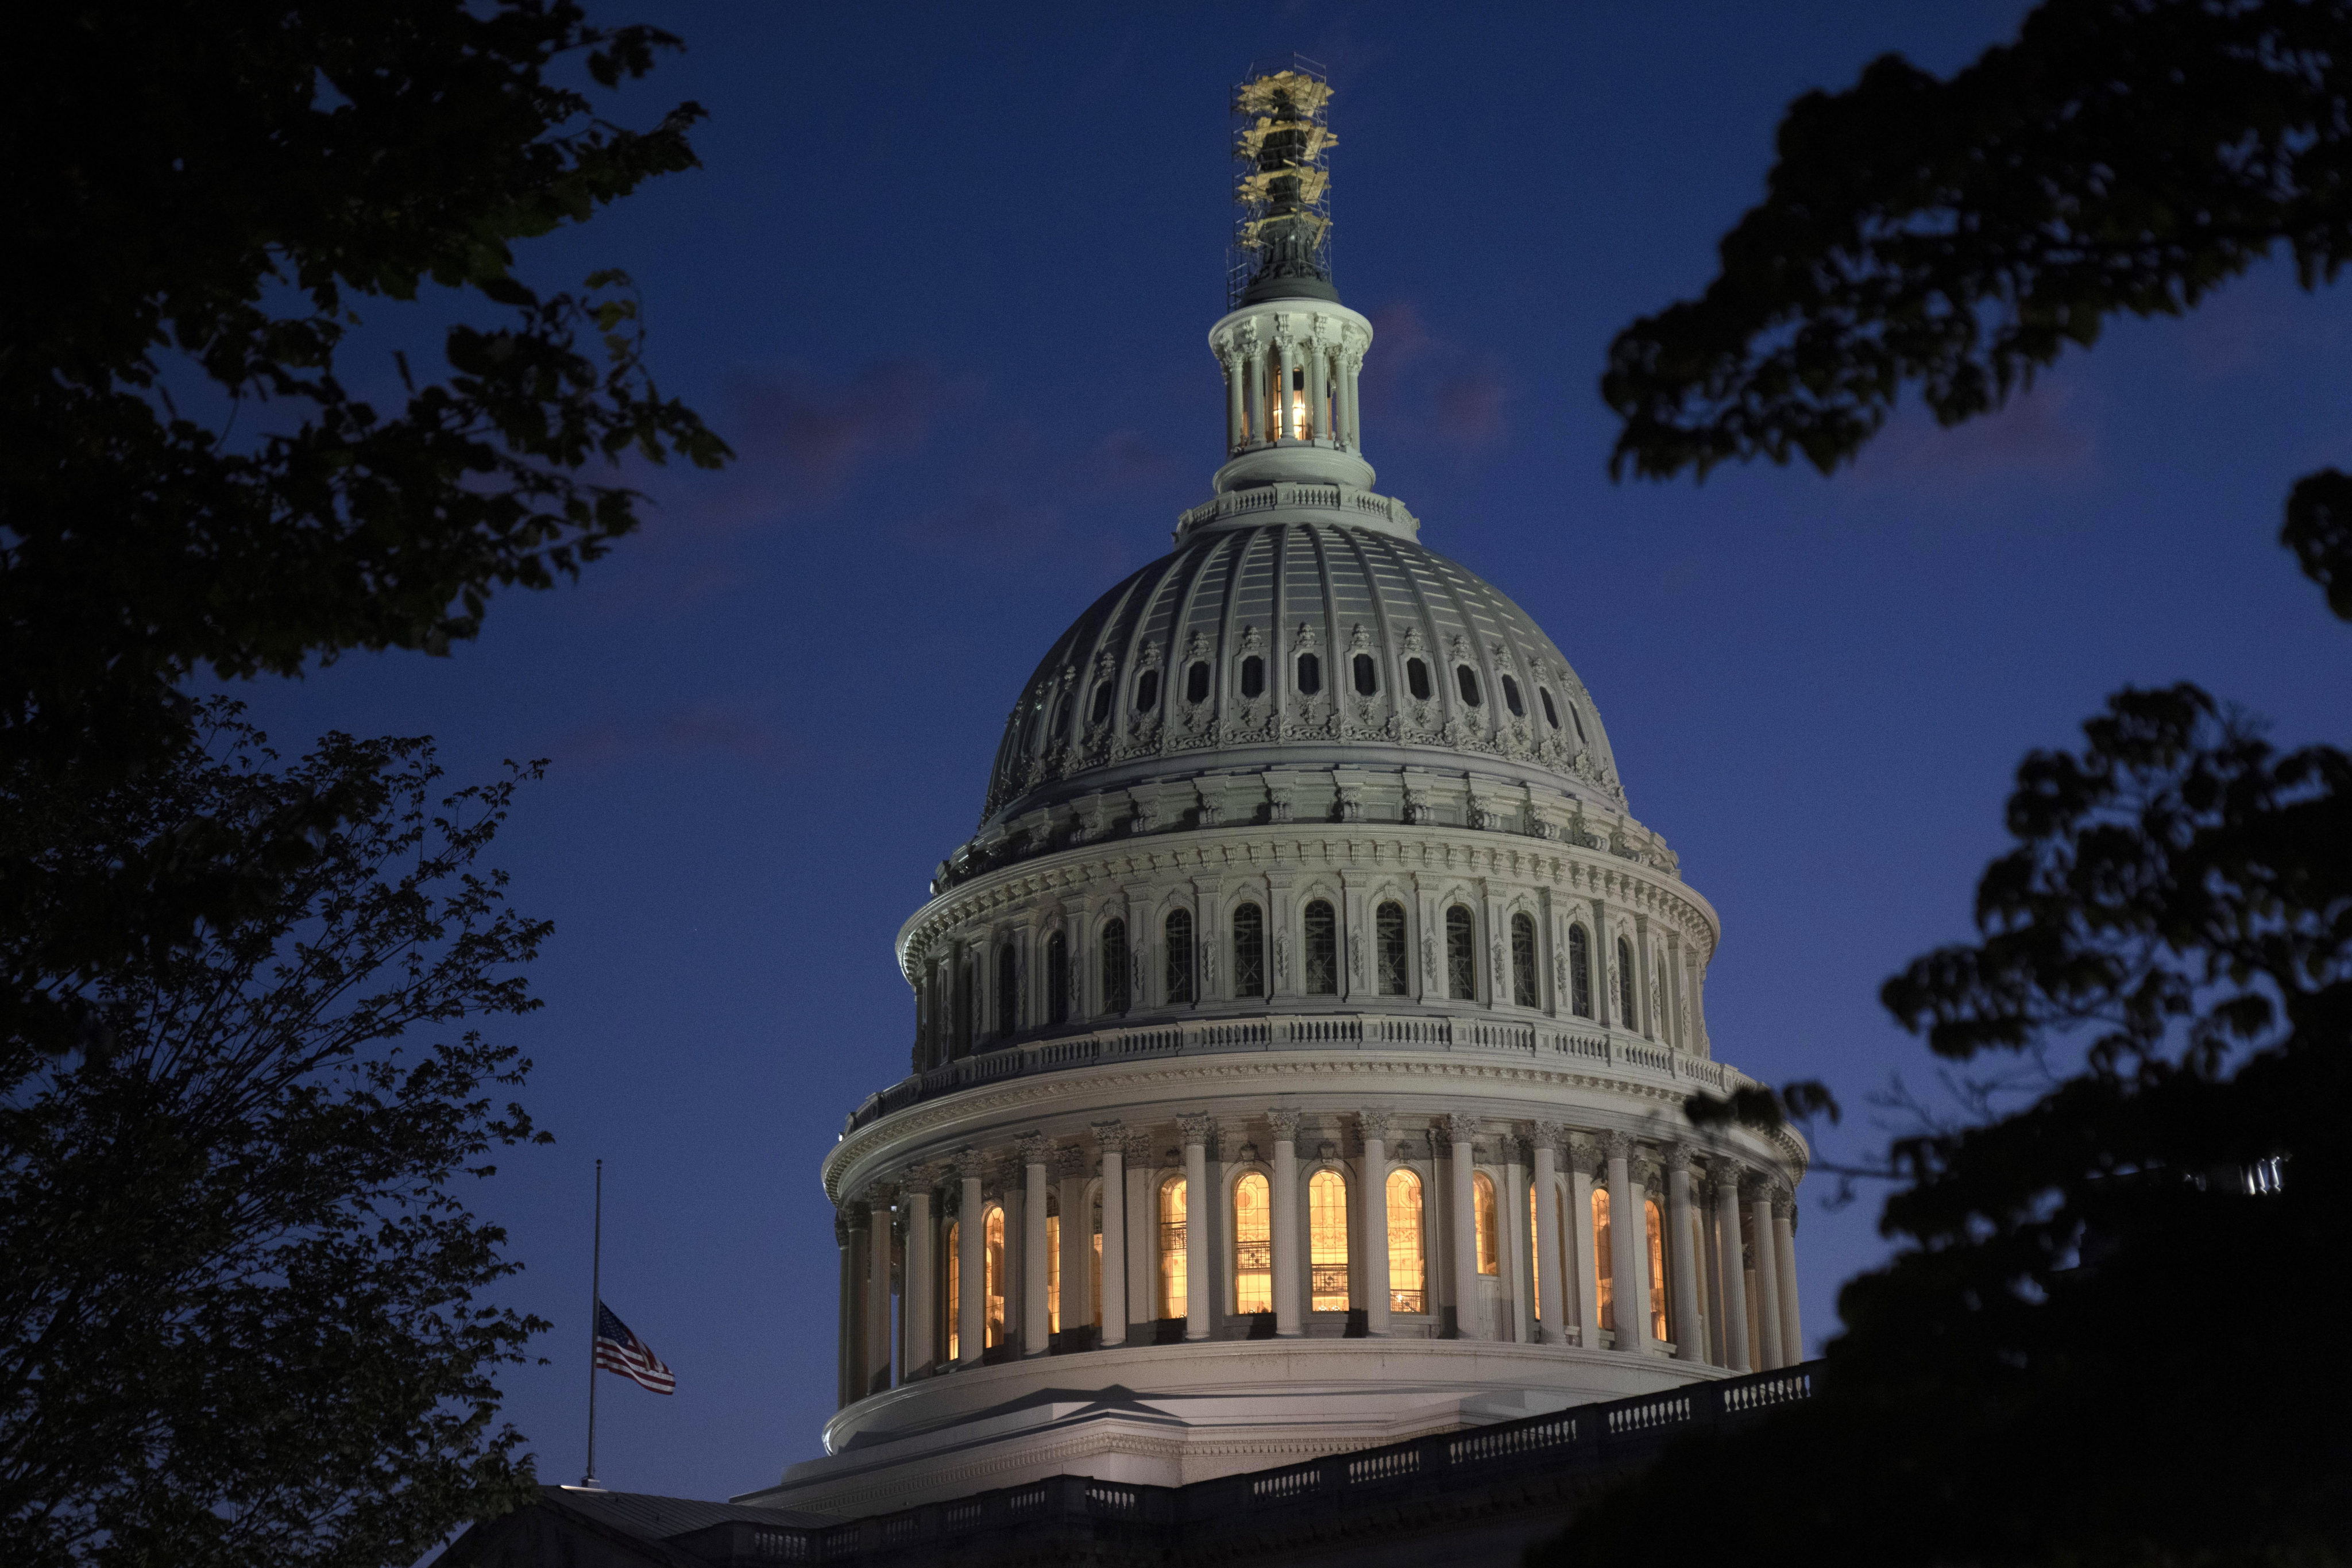 Night falls on the dome of the US Capitol hours after congressmn Kevin McCarthy was ousted as speaker of the House on Tuesday. Photo: AP